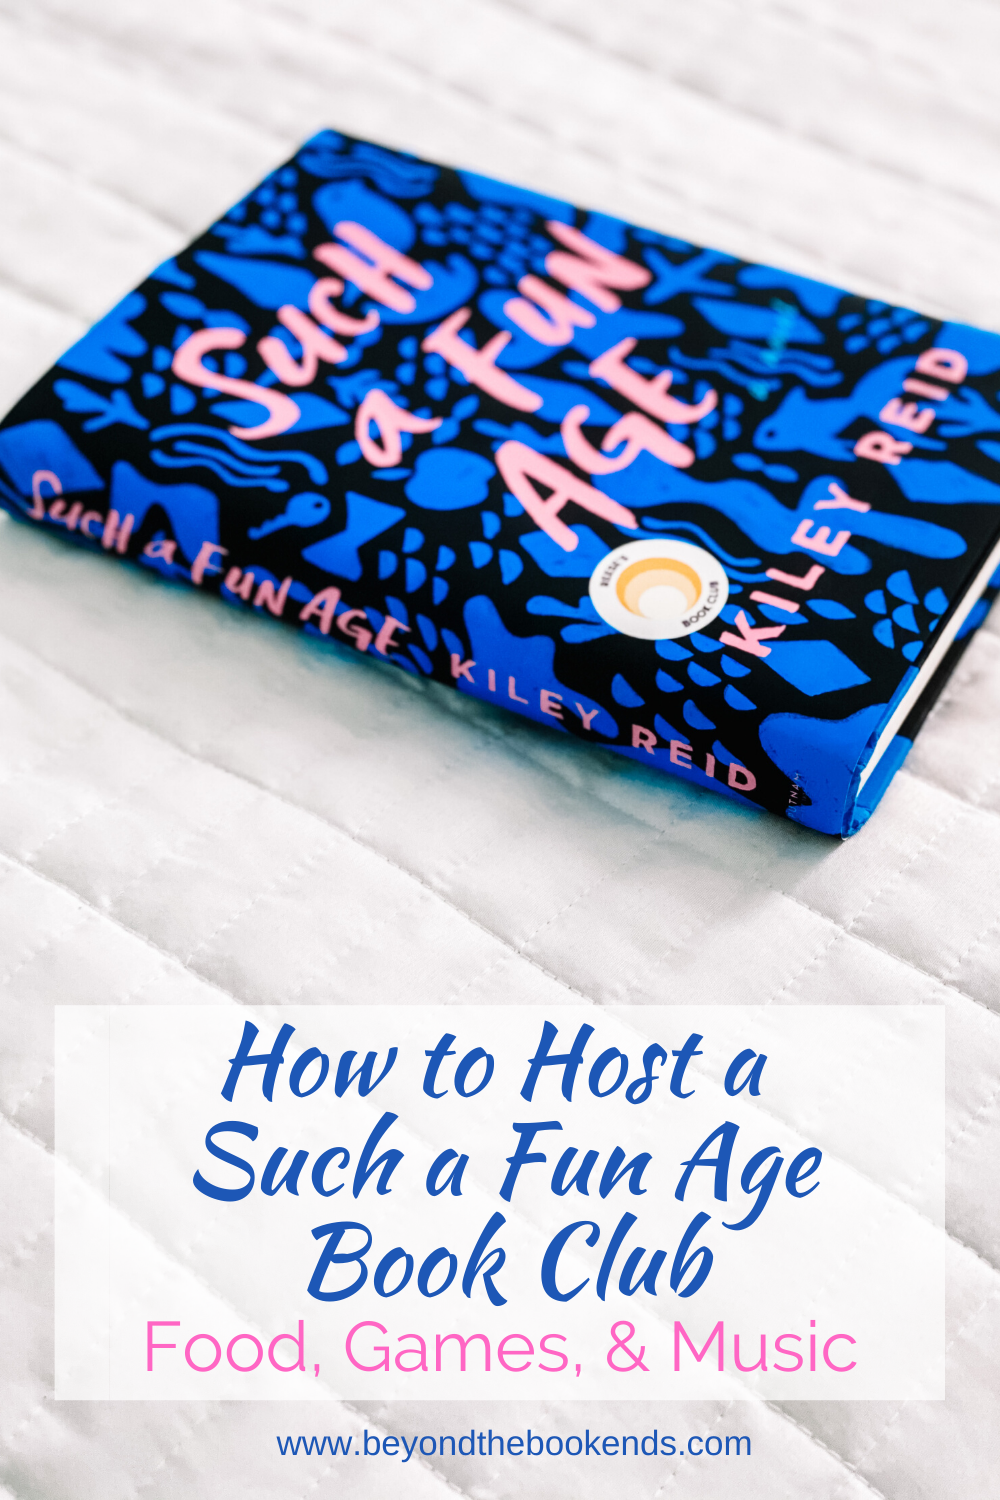 Reese Witherspoon's book club pick Such a Fun Age by Kiley Reid is the perfect book for your next virtual book club. We've got the deets on how to make your next virtual book club discussion engaging and fun.